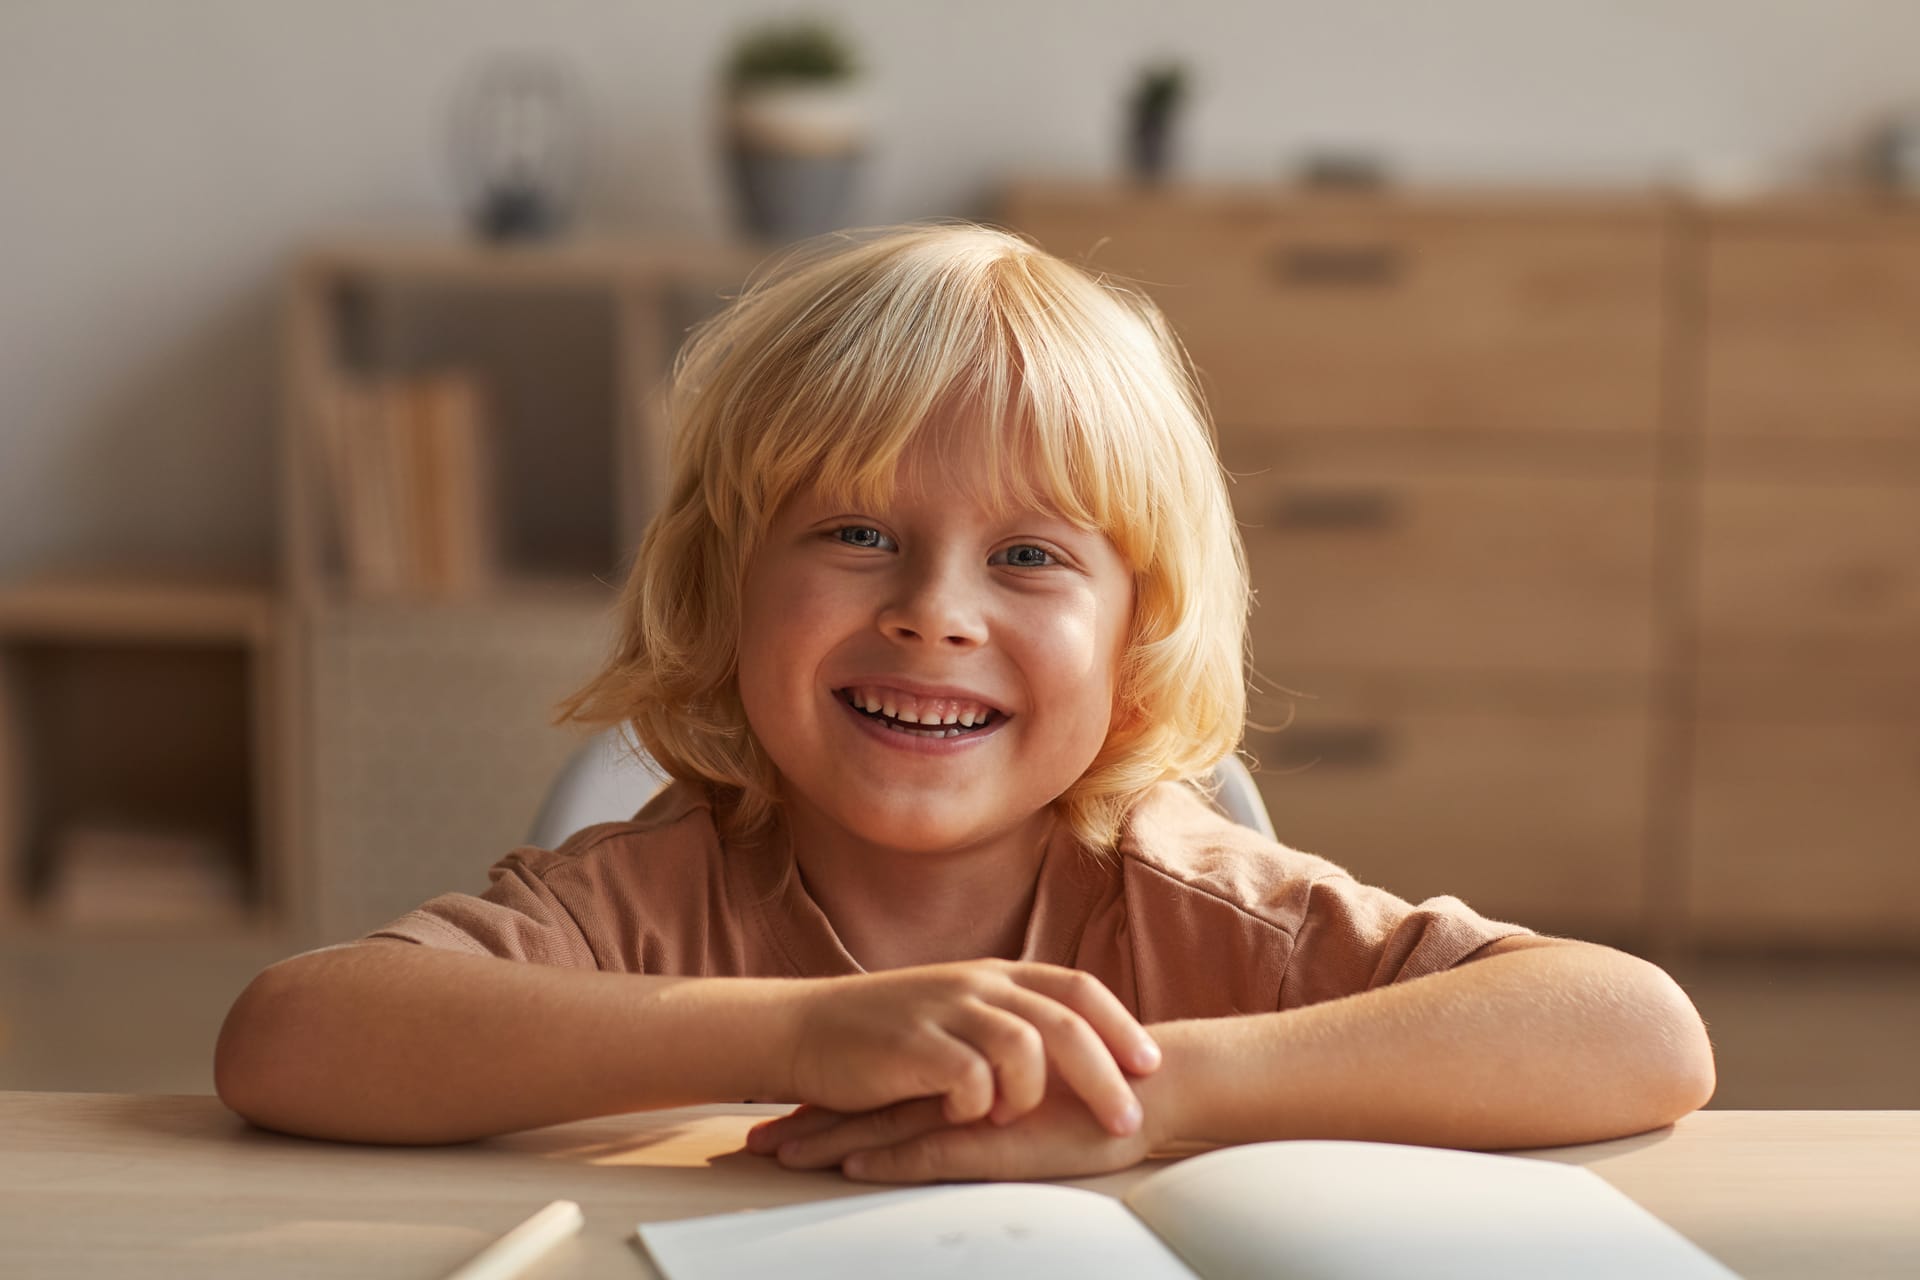 Boy with blond hair smiling while sitting table with copybooks